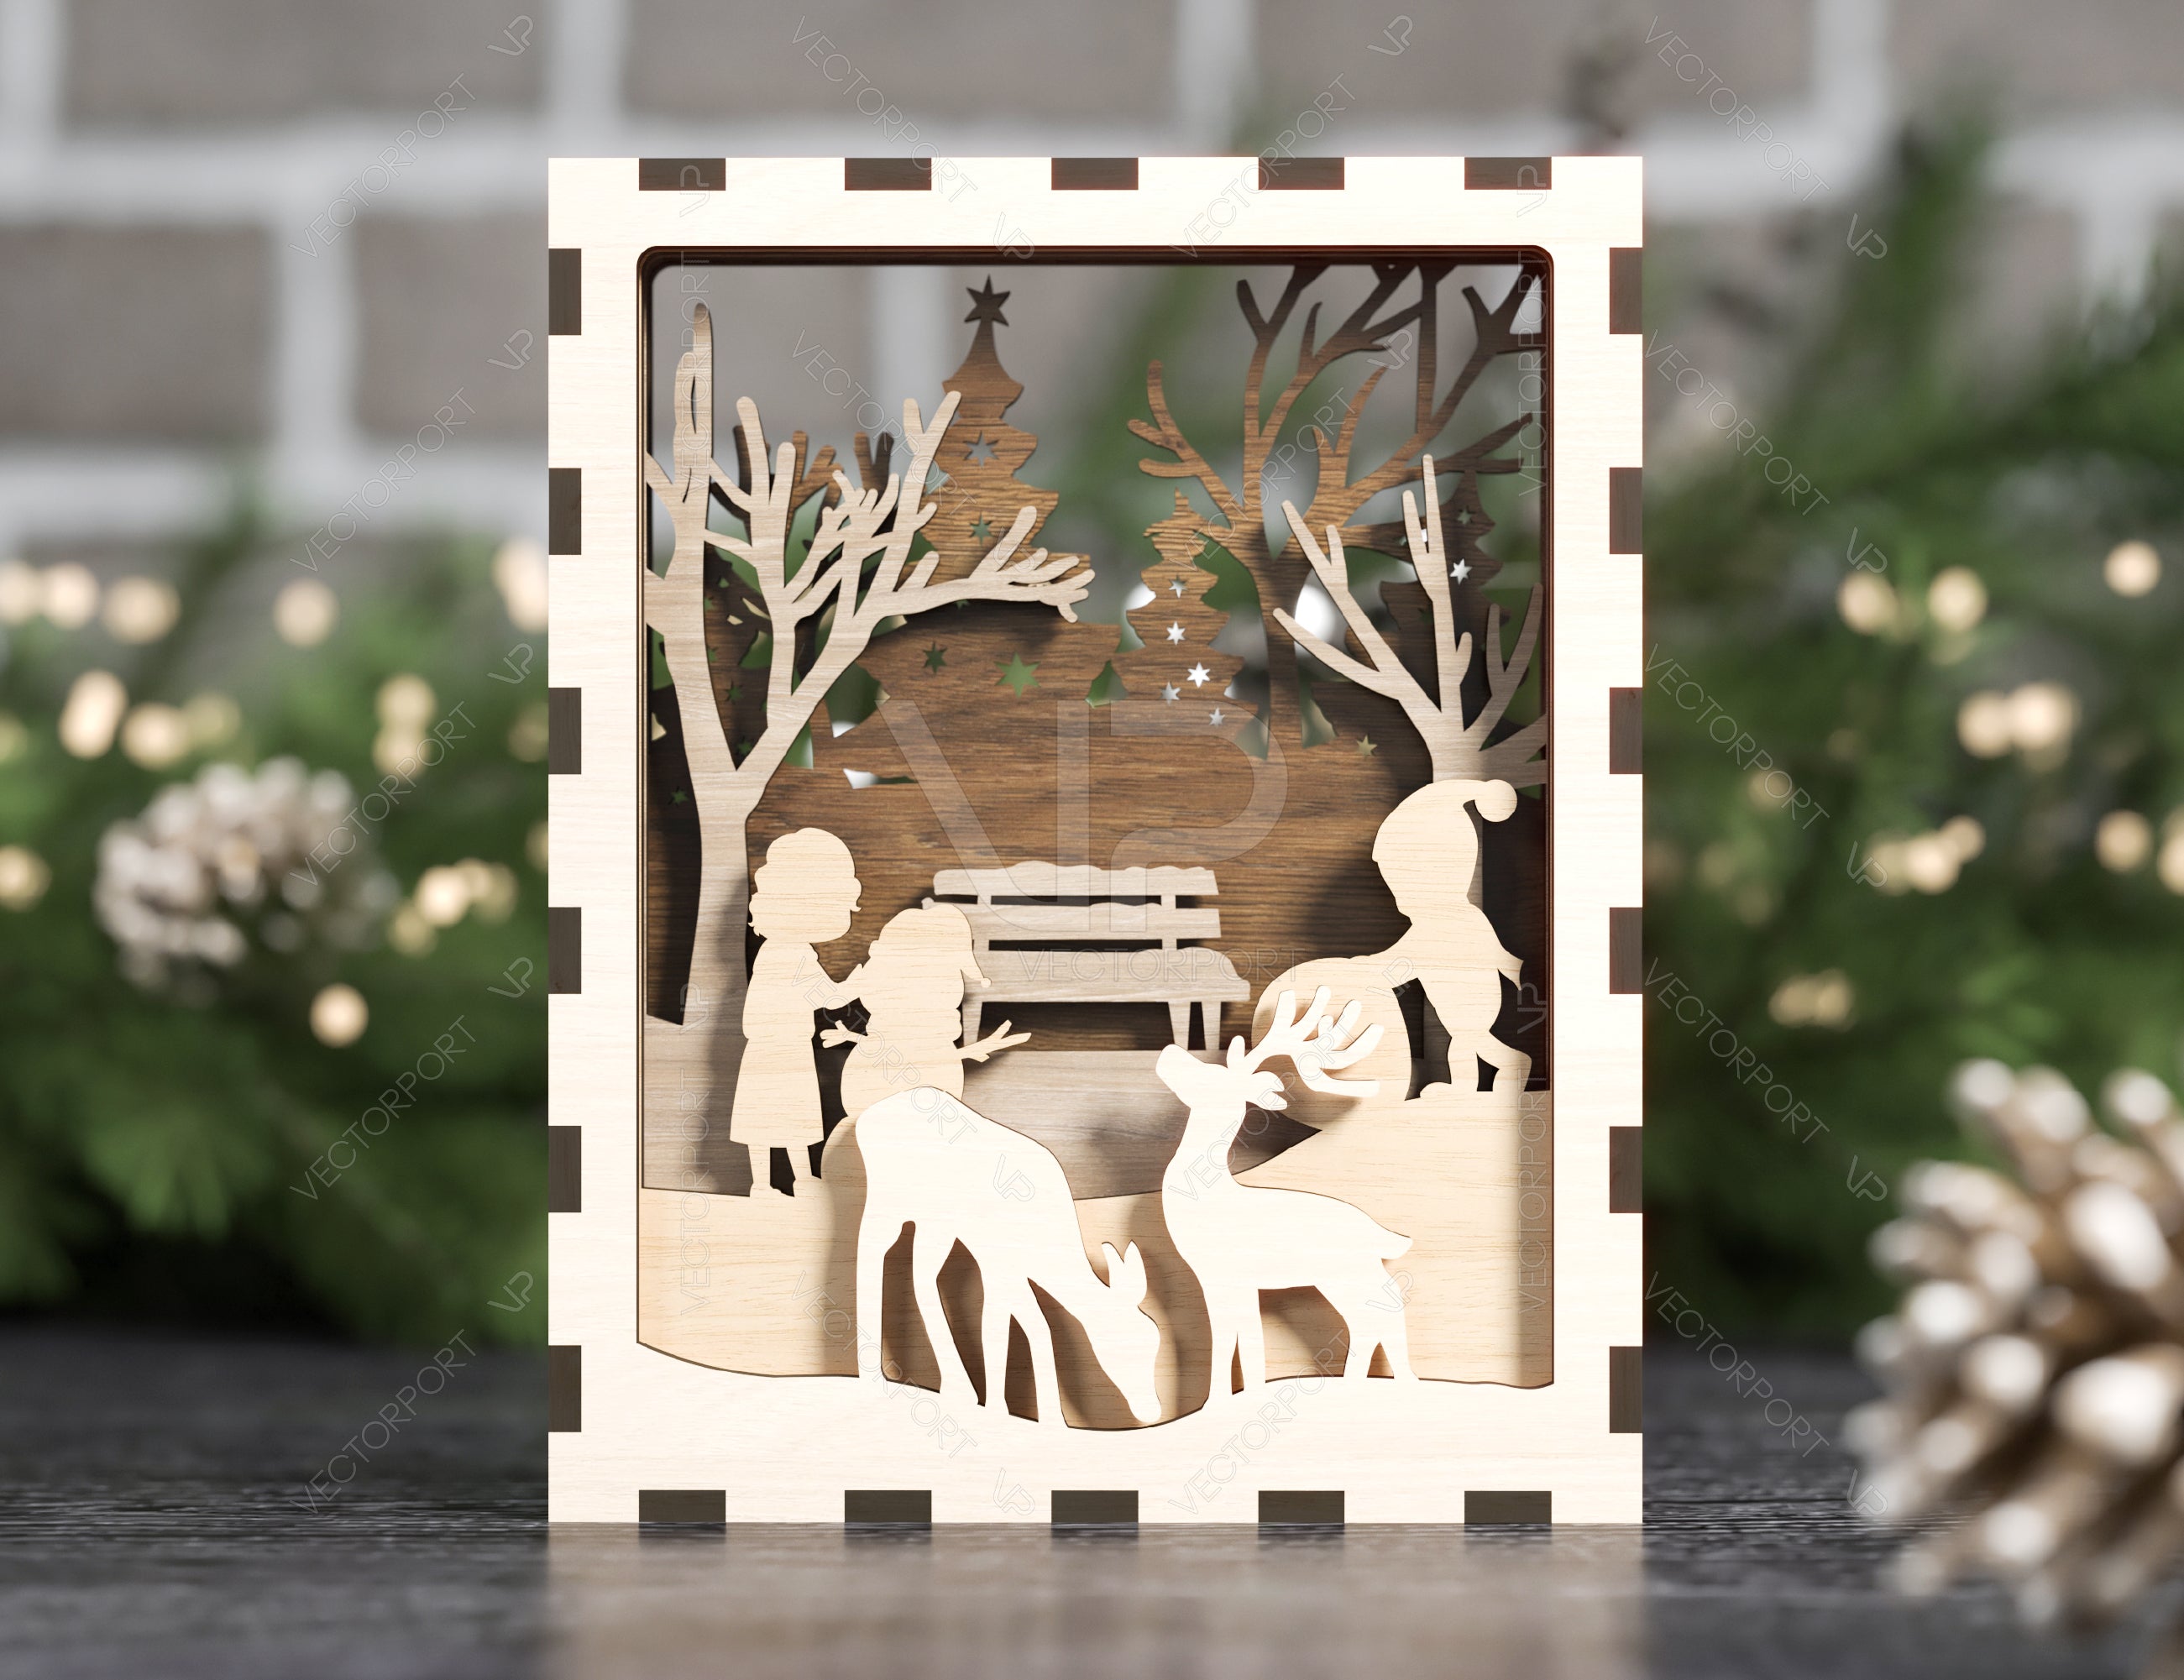 Christmas Multilayer Christmas Gift Ornament Snowman Deer Forest Scene Decorative Wooden Layered New Year laser cut Digital Download |#U344|